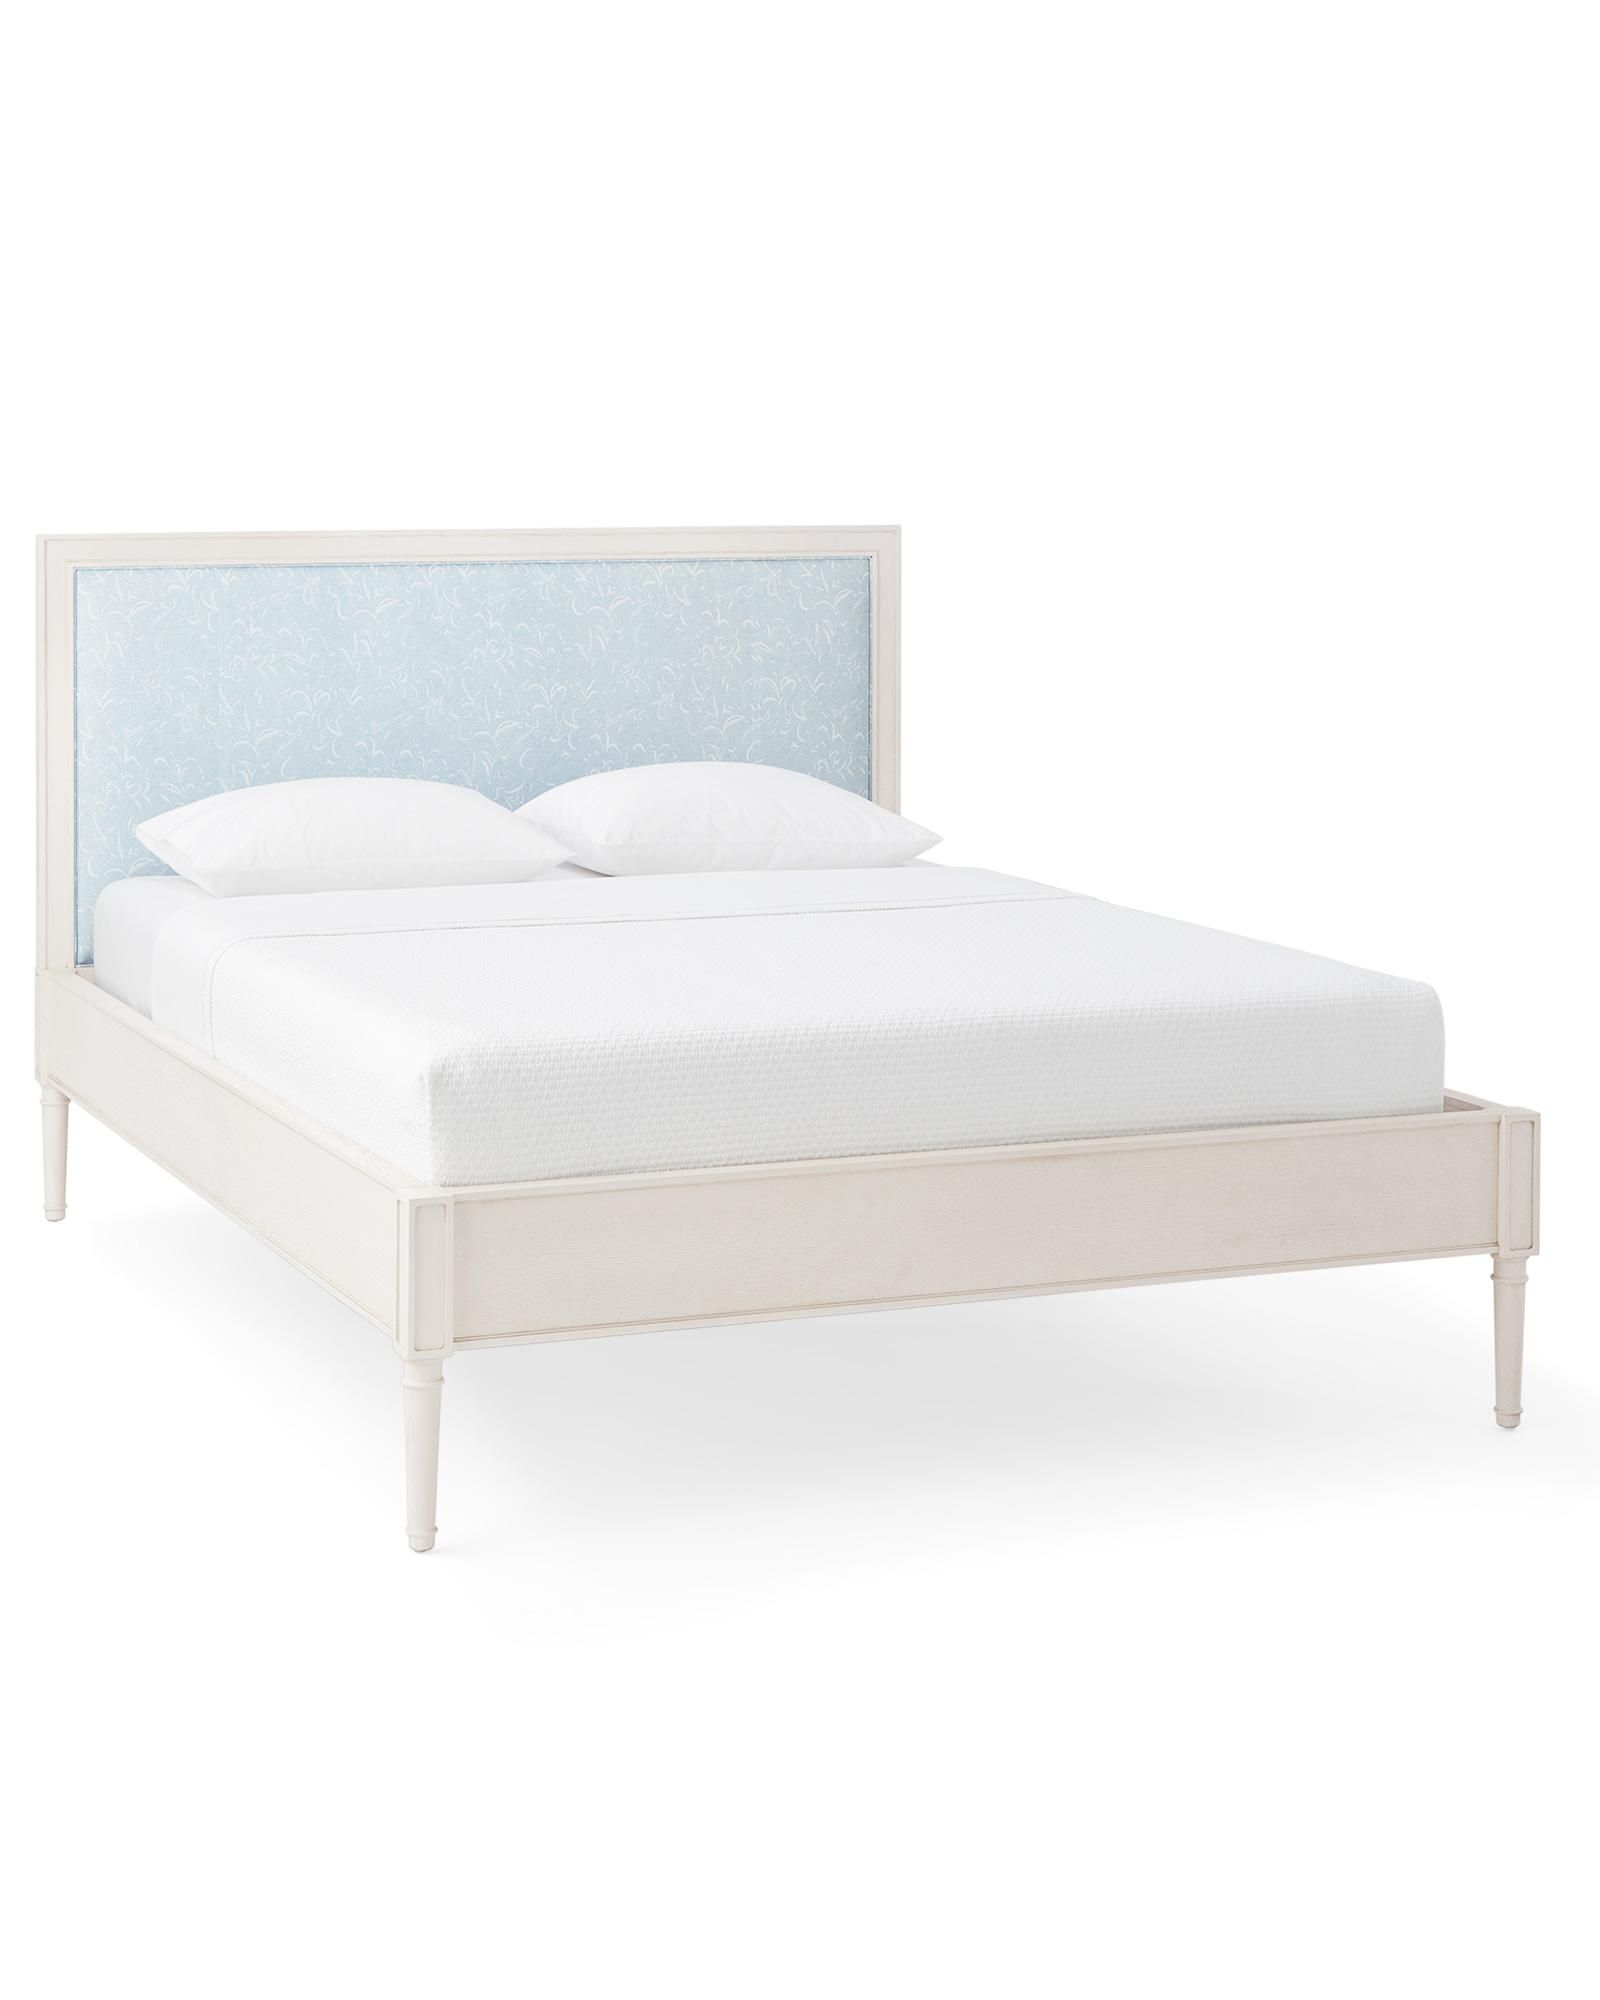 Bridgeway Bed - Washed White - Performance Umbria Sky | Serena and Lily